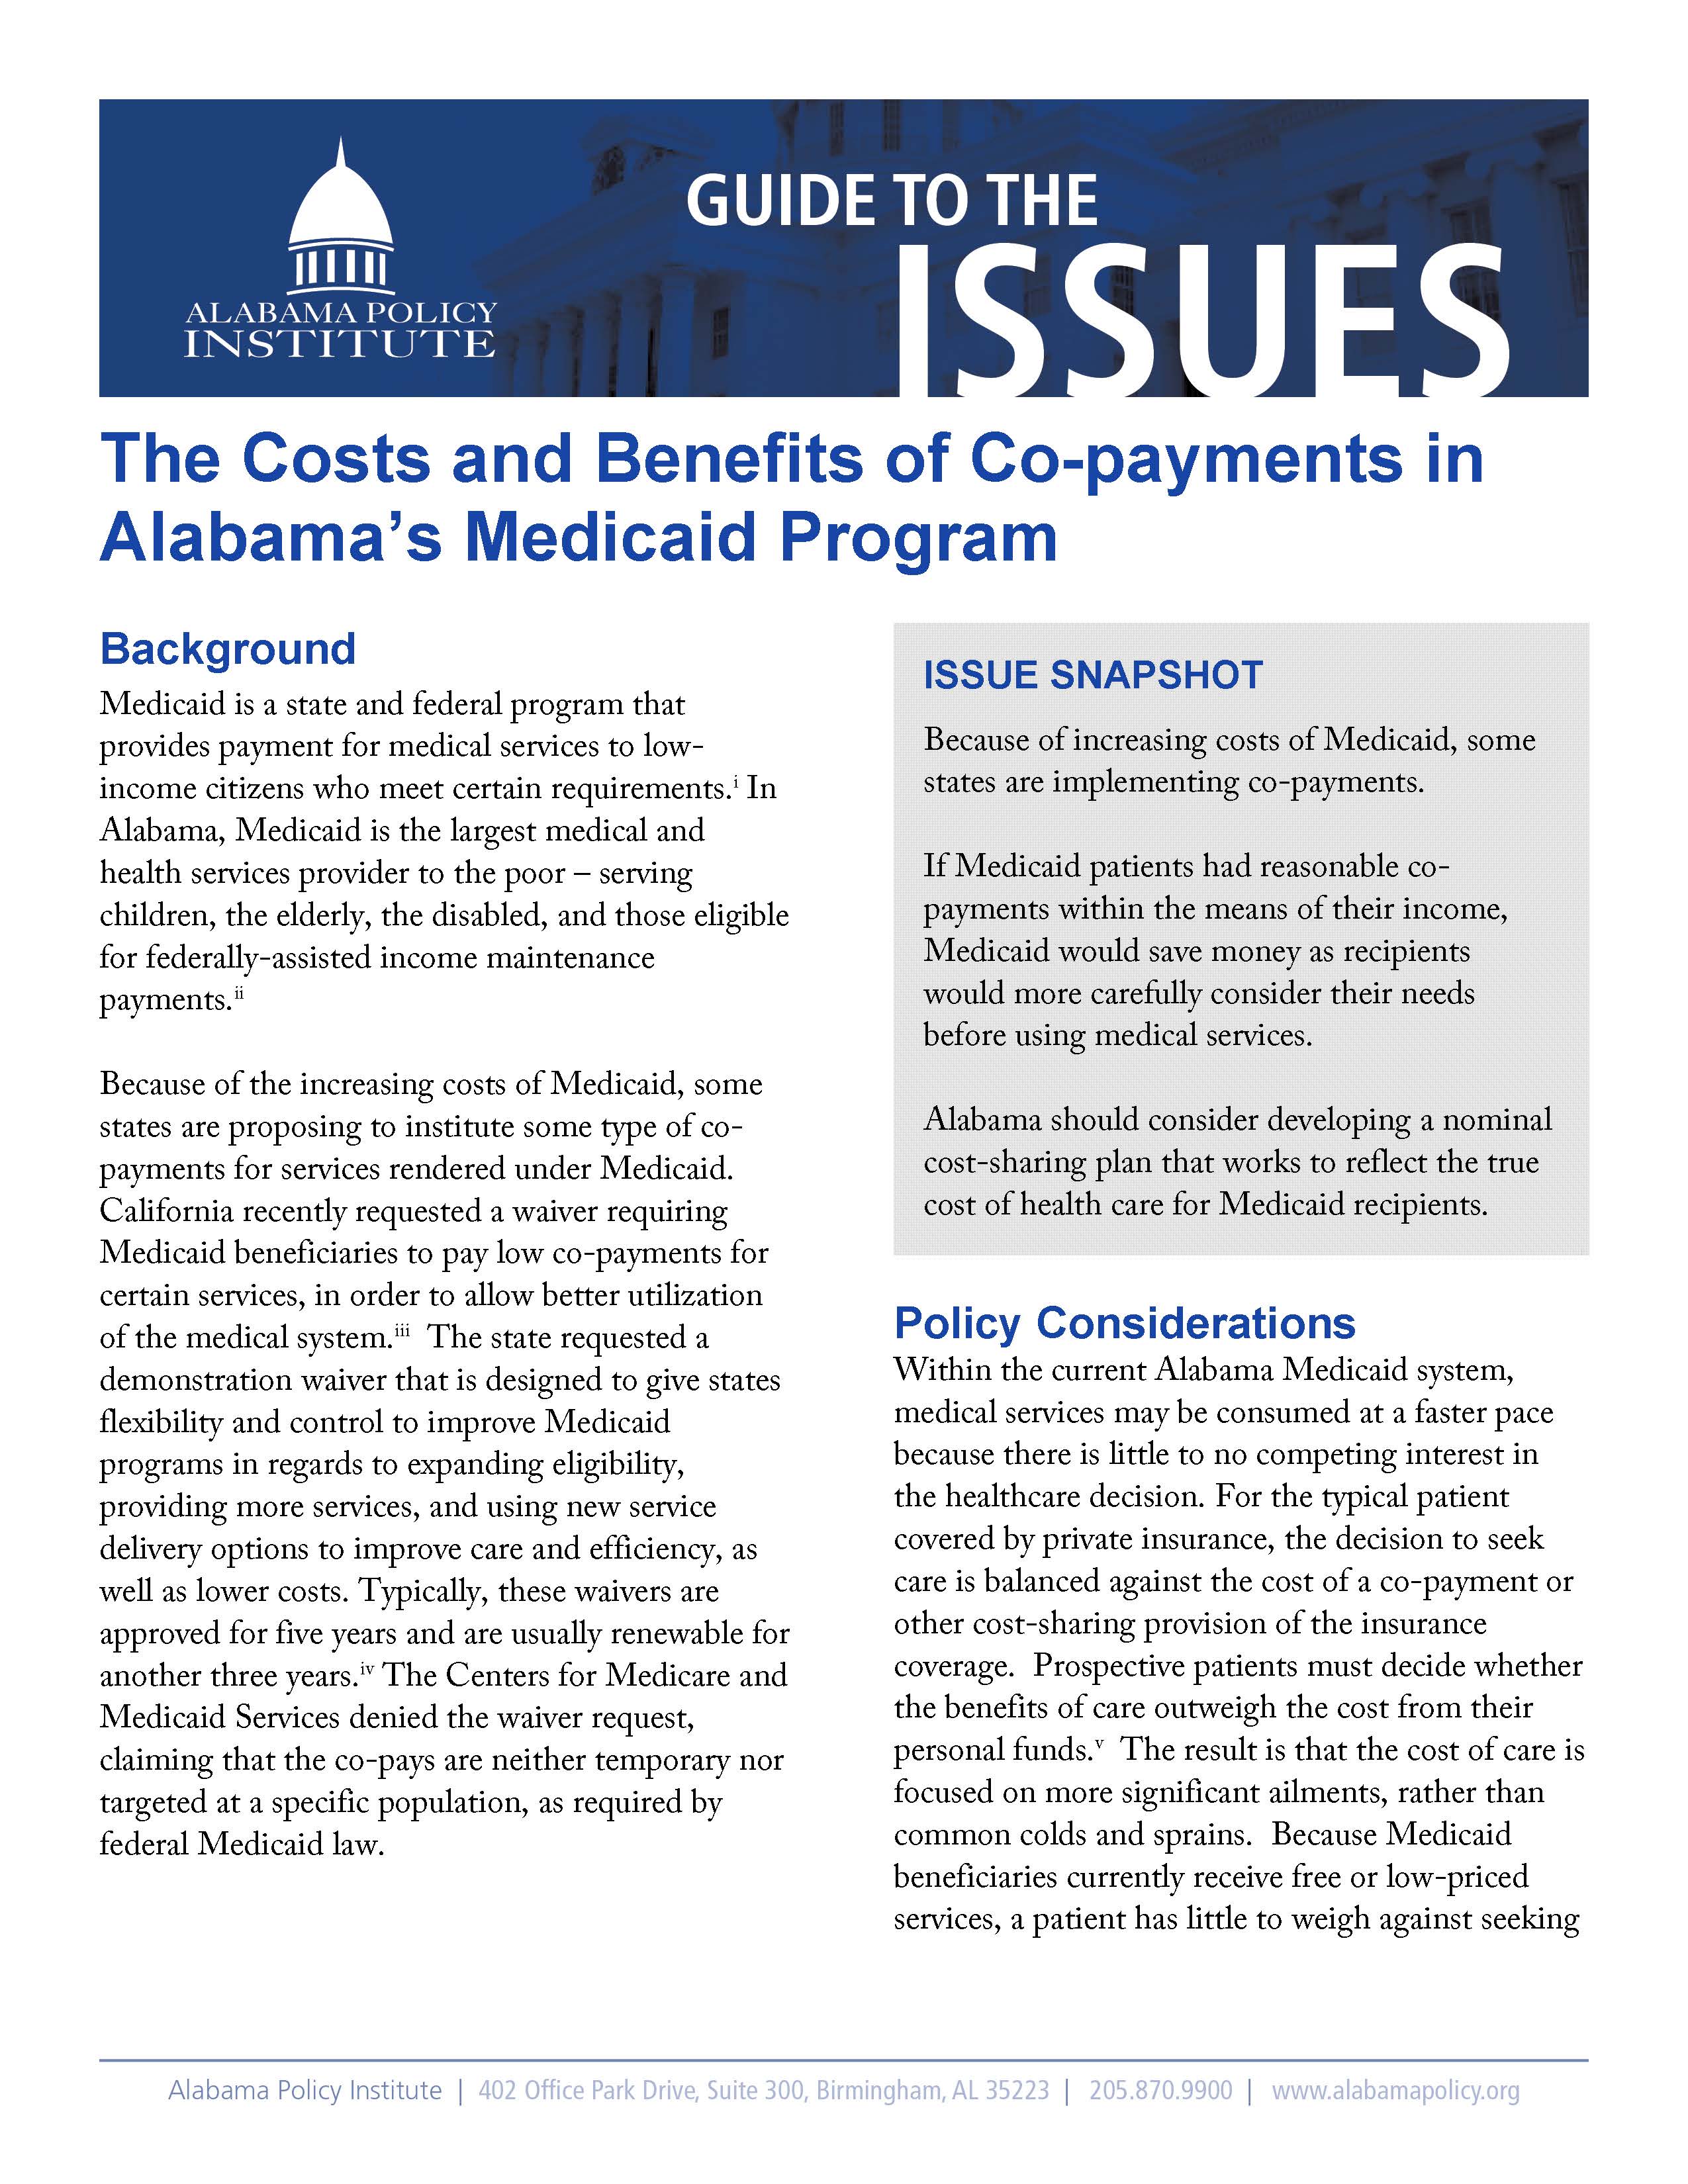 The Costs and Benefits of Co-payments in Alabama's ...